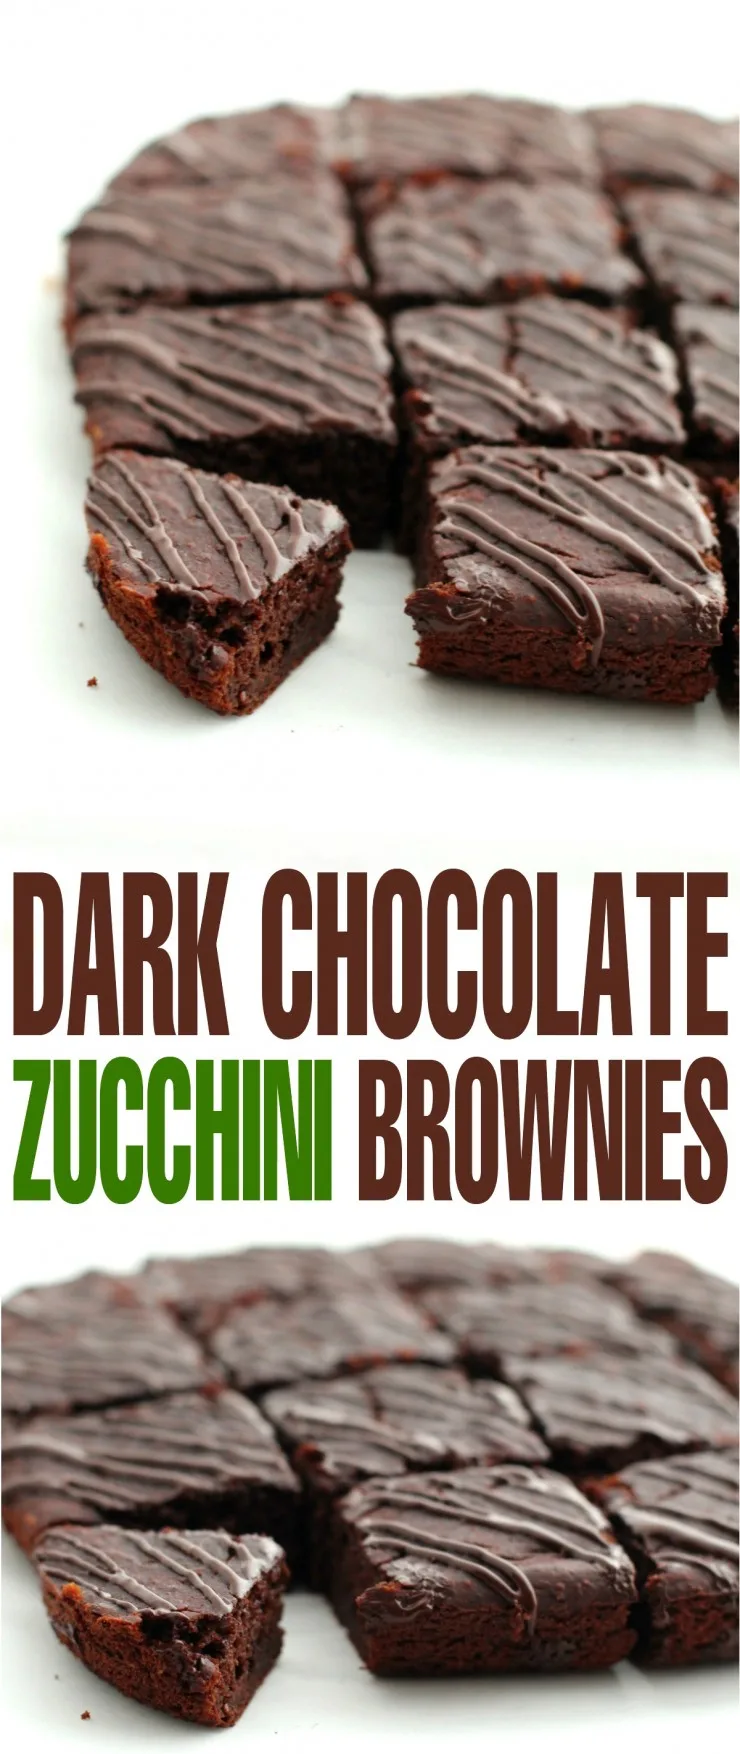 This clean eating recipe for Dark Chocolate Zucchini Brownies is an easy way to enjoy a special chocolate treat without having to feel any guilt. This recipe is a great alternative to my fan-favourite Fudgy Avocado Brownies with Avocado Frosting recipe.